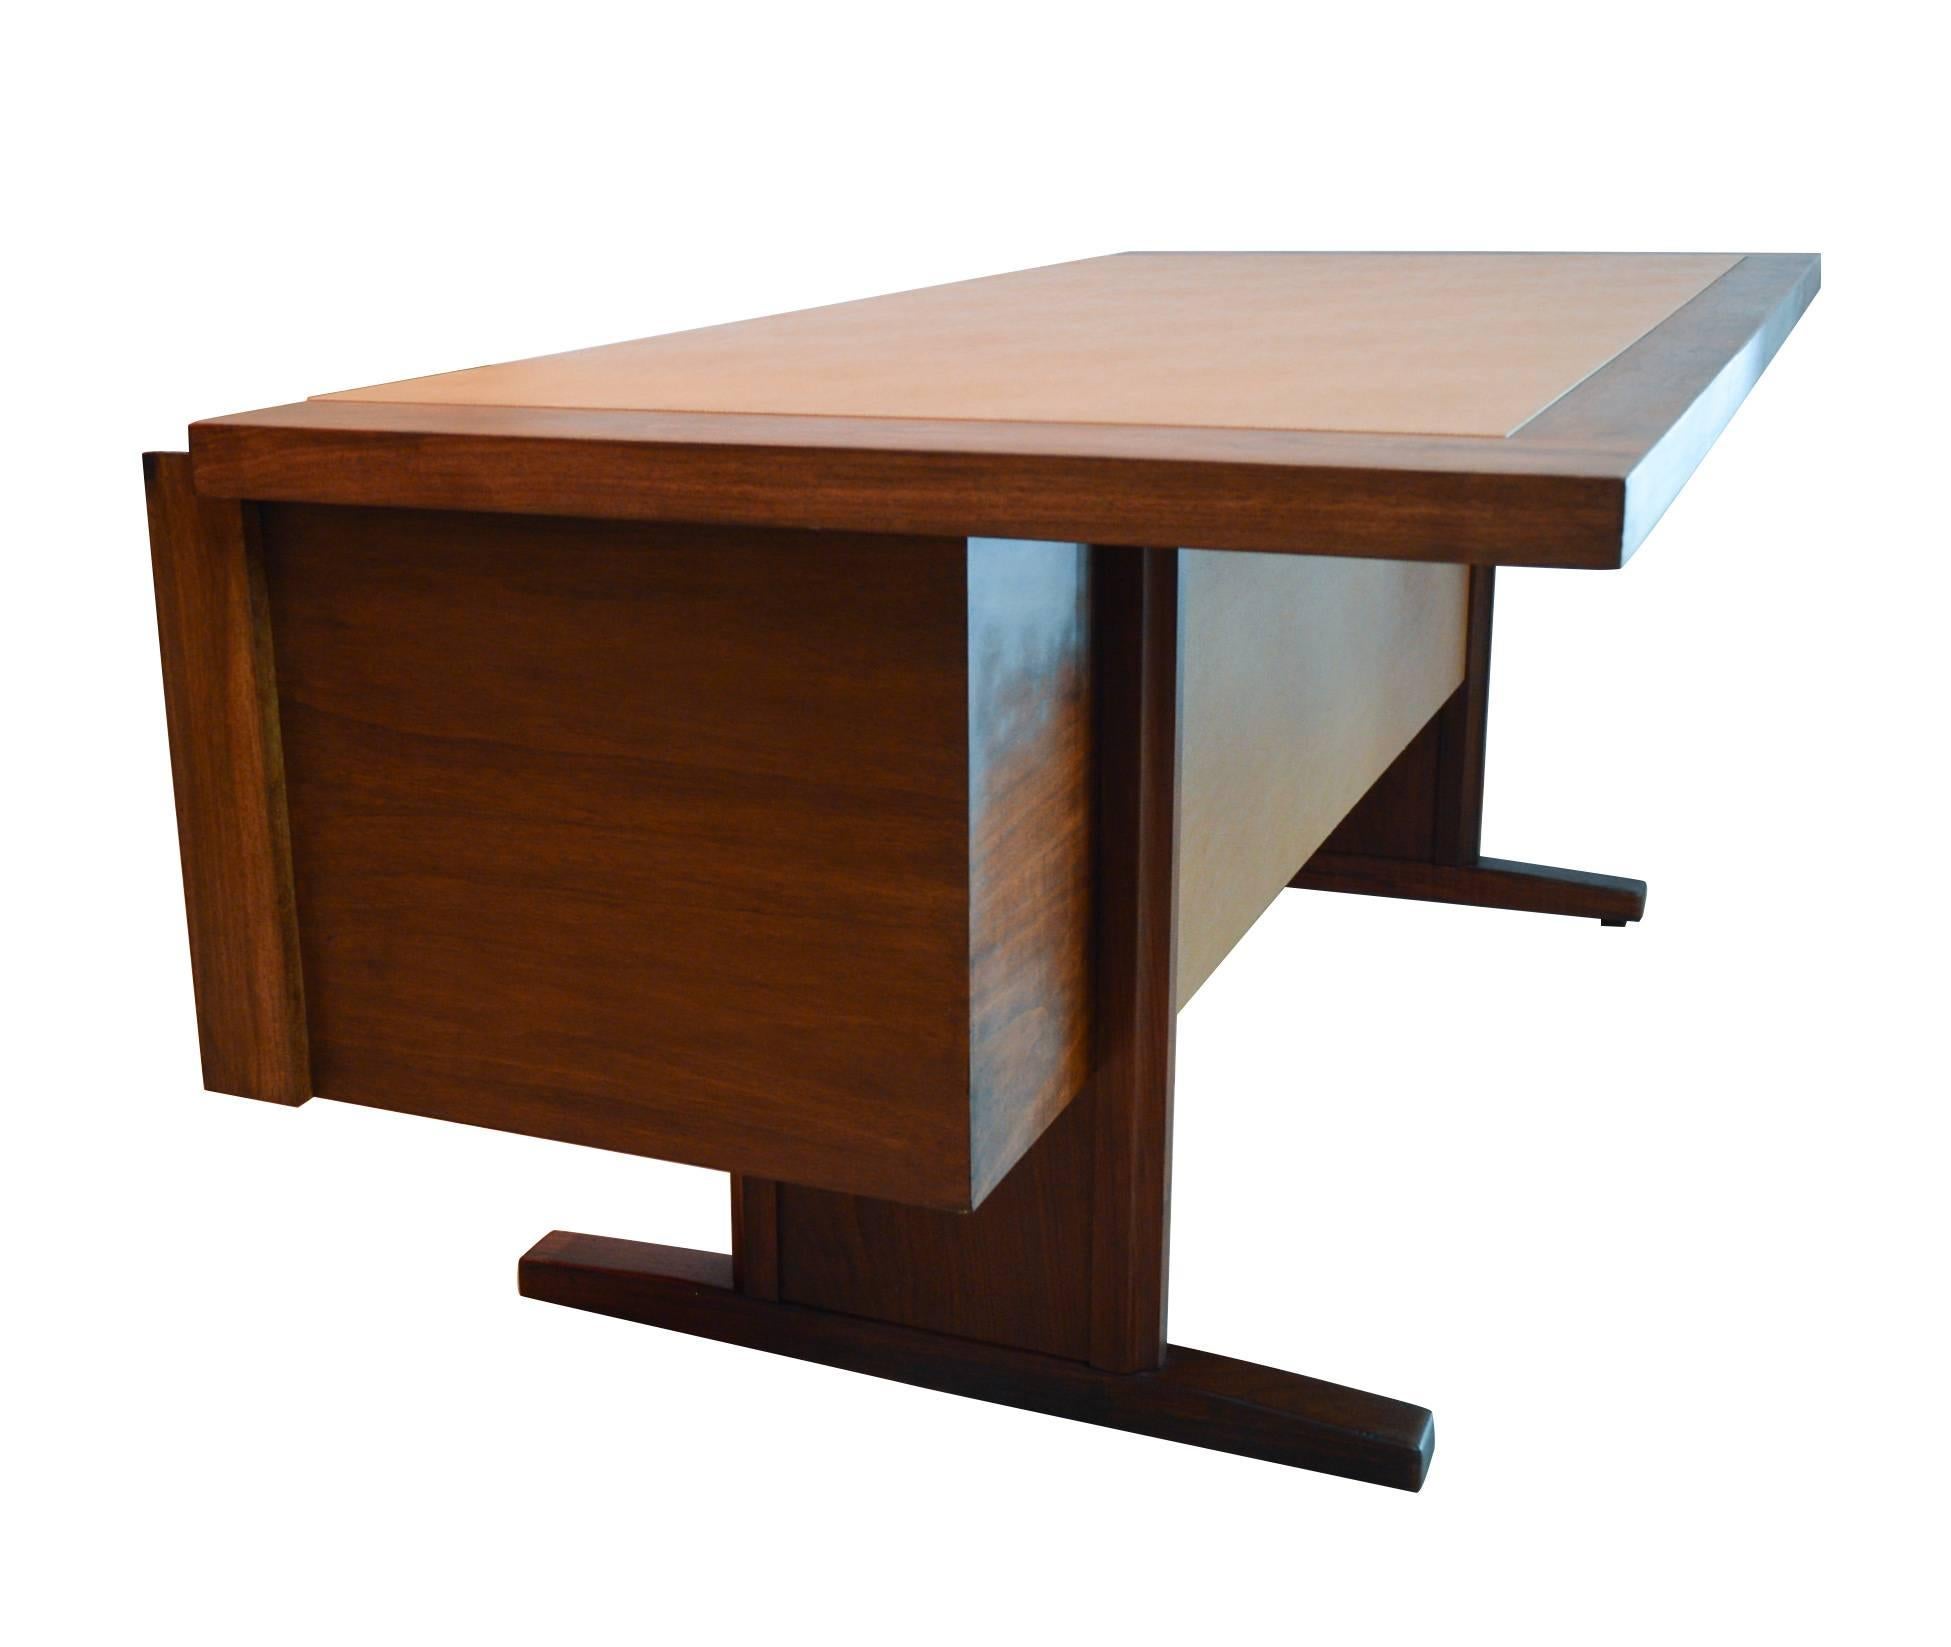 1960s walnut executive desk by Martin Borenstein, made in California. The desk has three drawers, a file cabinet drawer with rails, and a large leatherette inset desktop. There are a few small nicks and discolorations to the leatherette, as shown in